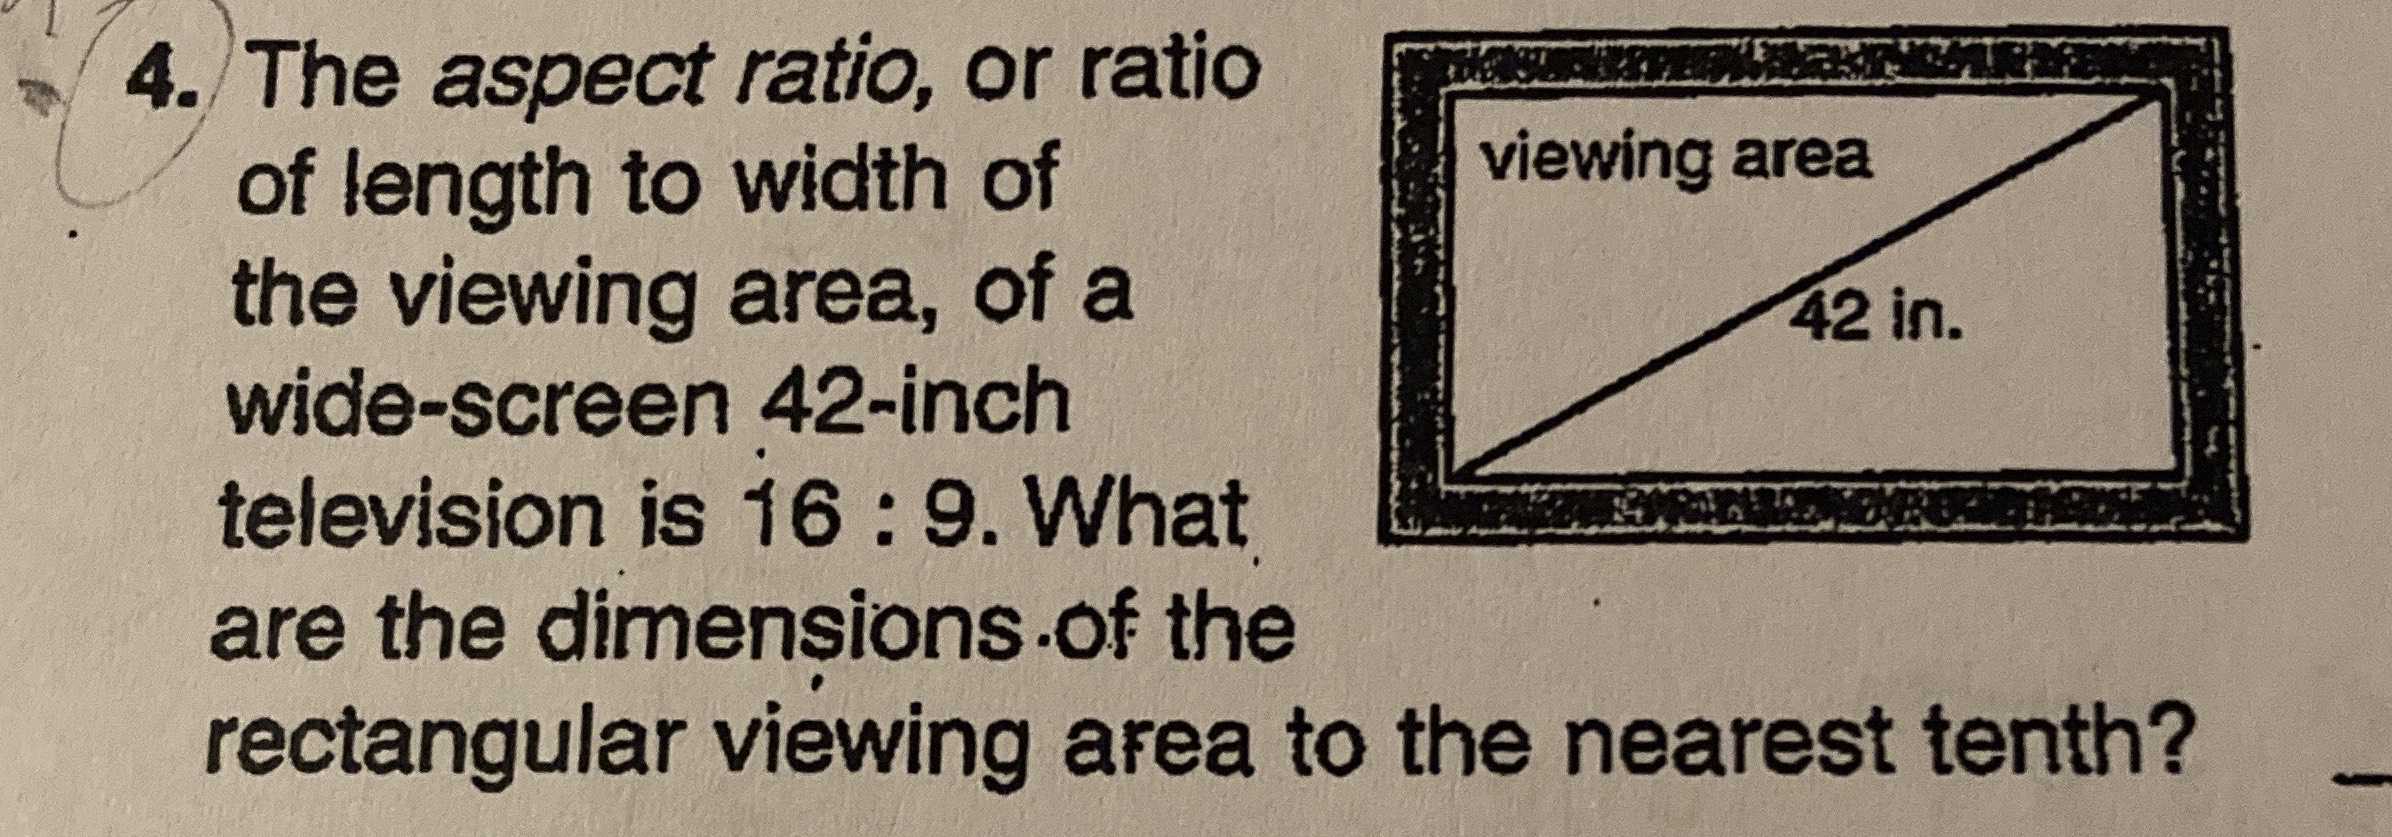 4. The aspect ratio, or ratio of length to width o...